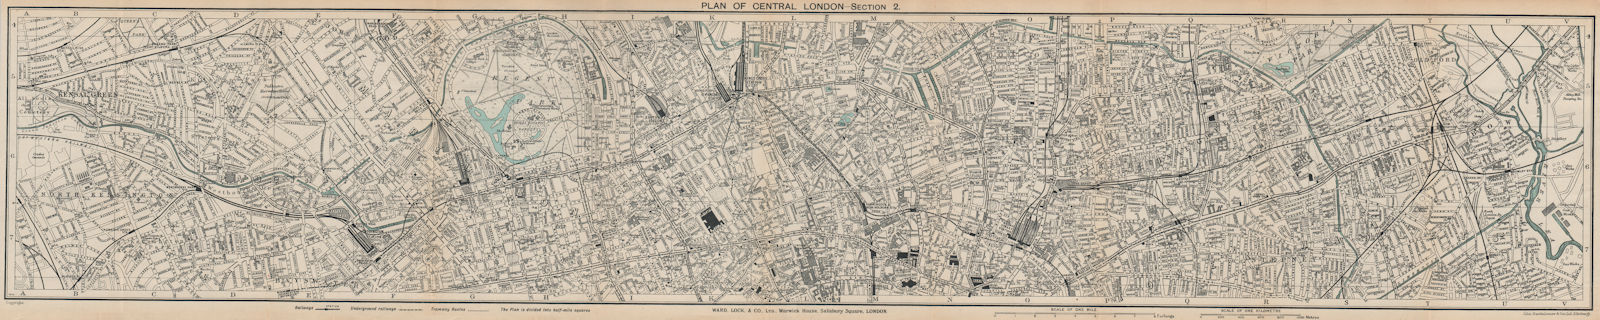 CENTRAL LONDON-SECTION 2 vintage town/city plan. London. WARD LOCK 1930 map